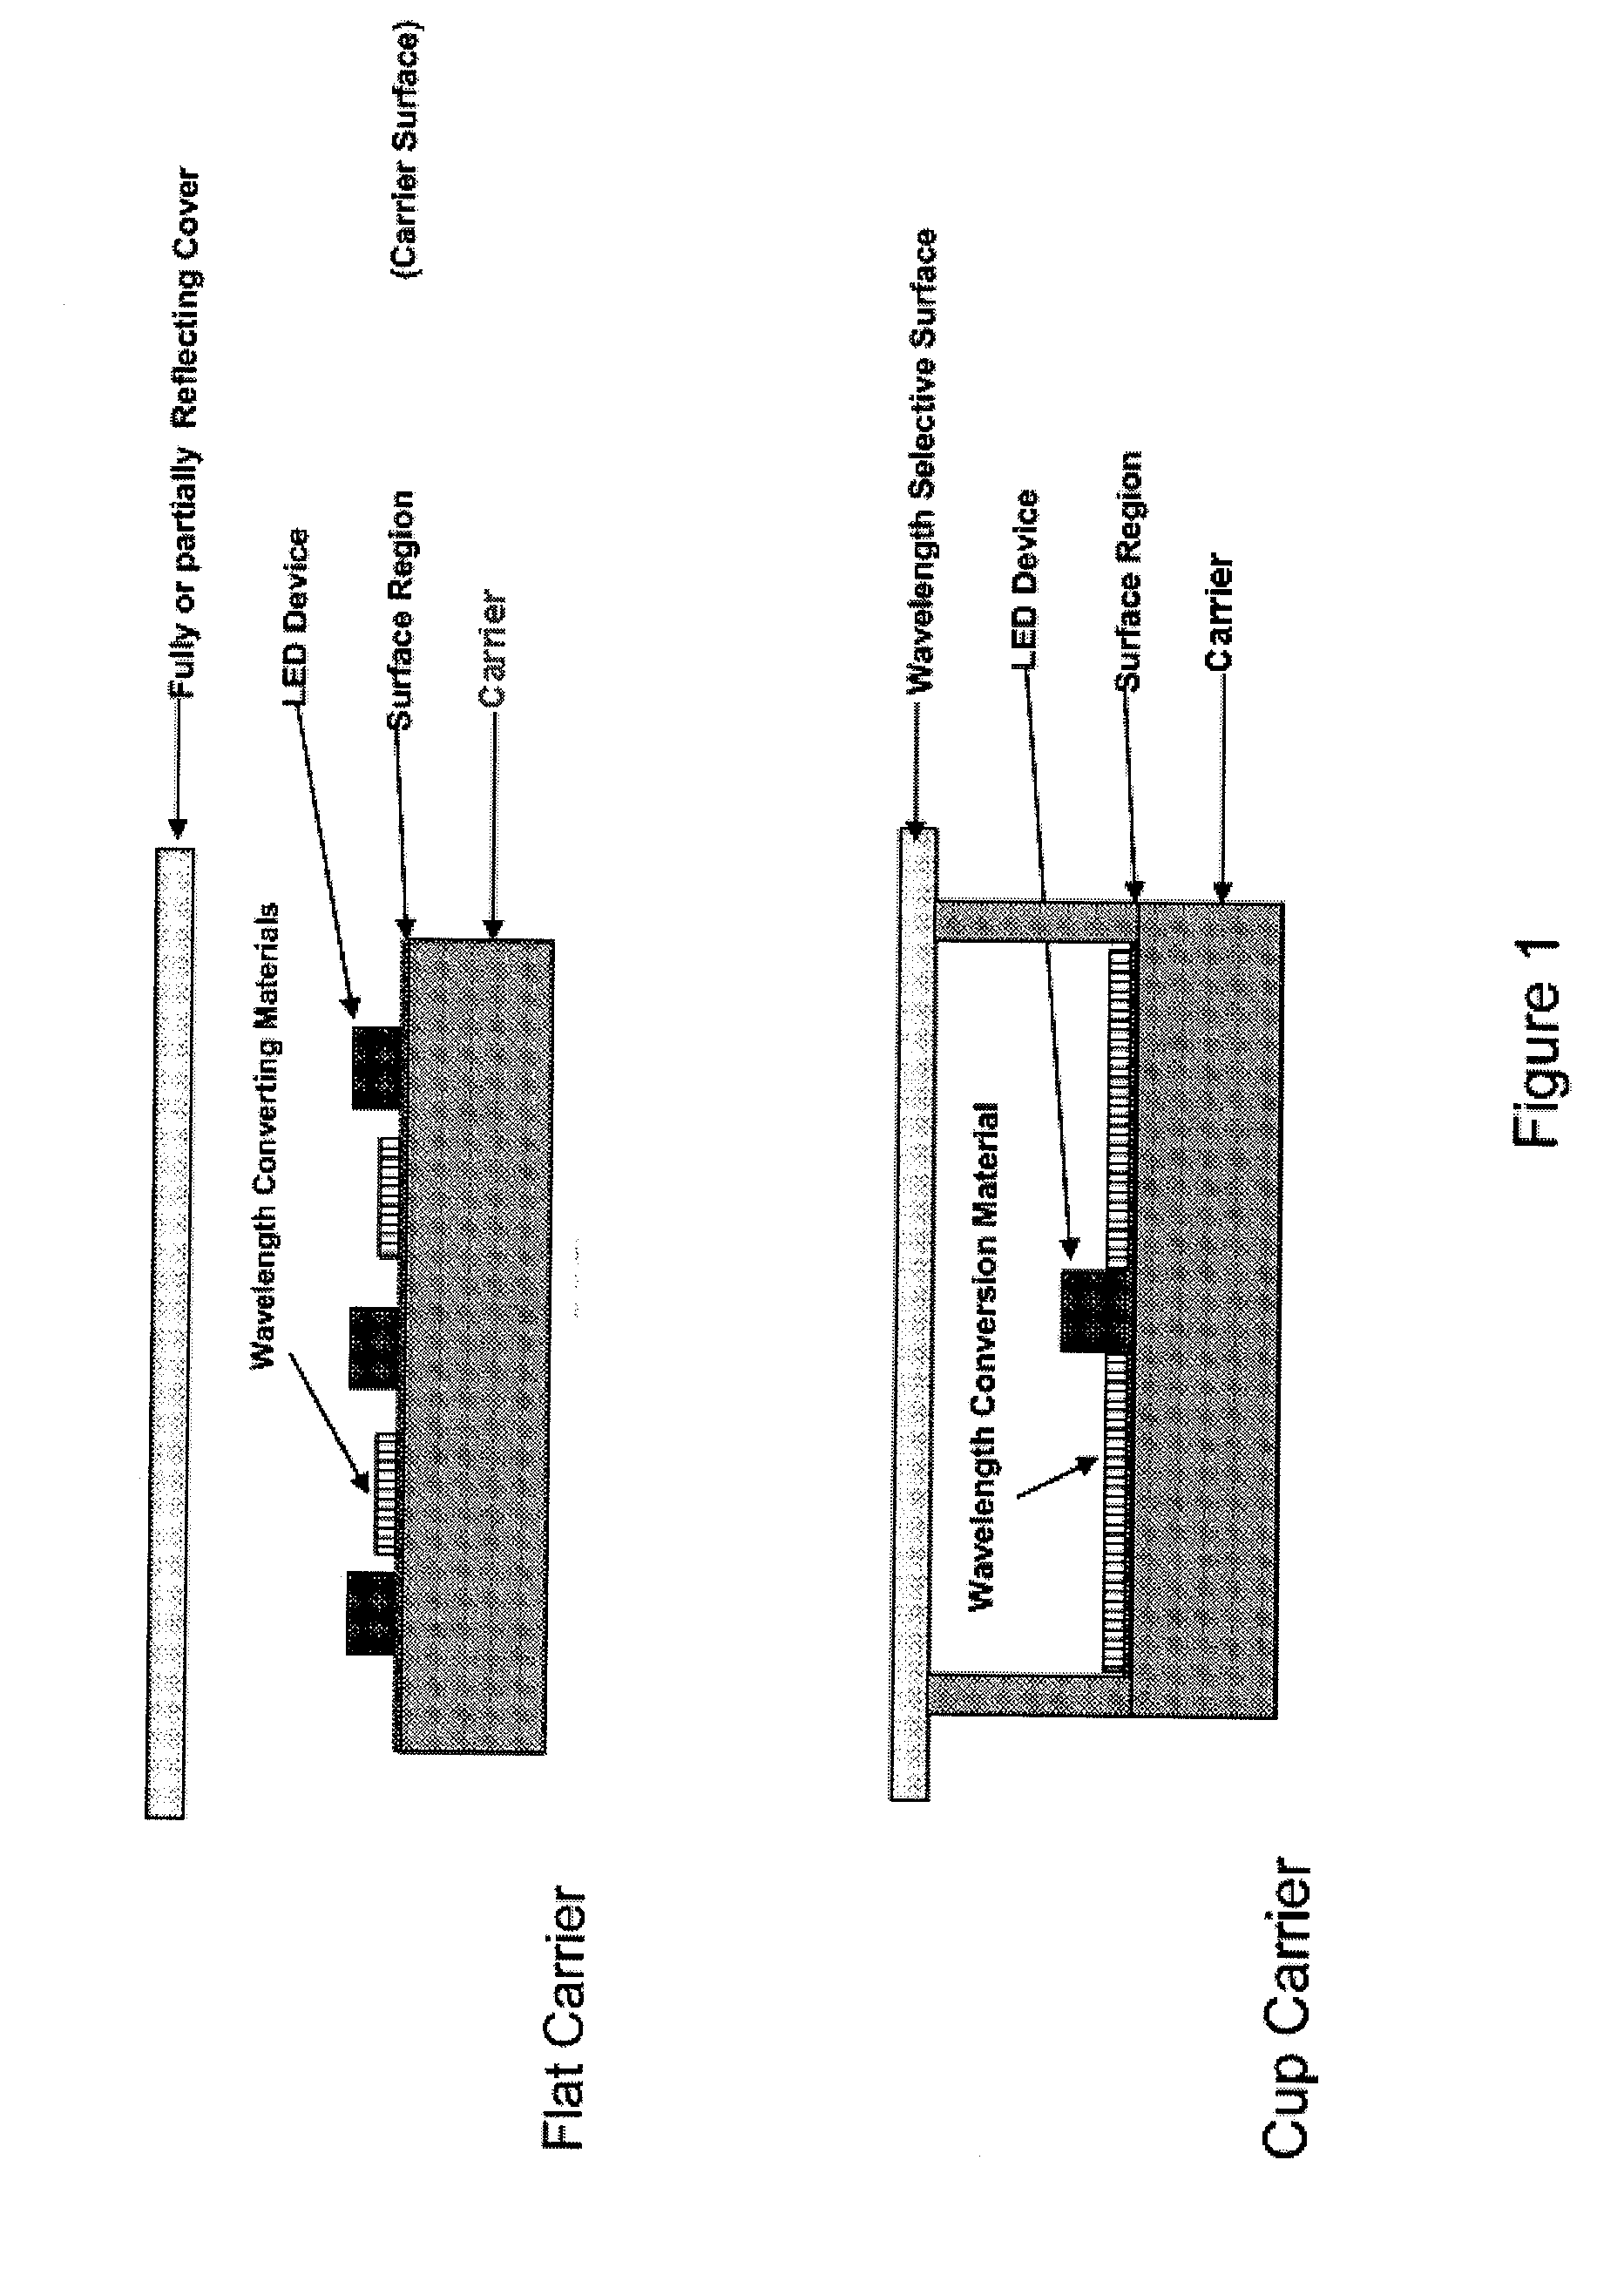 Reflection Mode Package for Optical Devices Using Gallium and Nitrogen Containing Materials